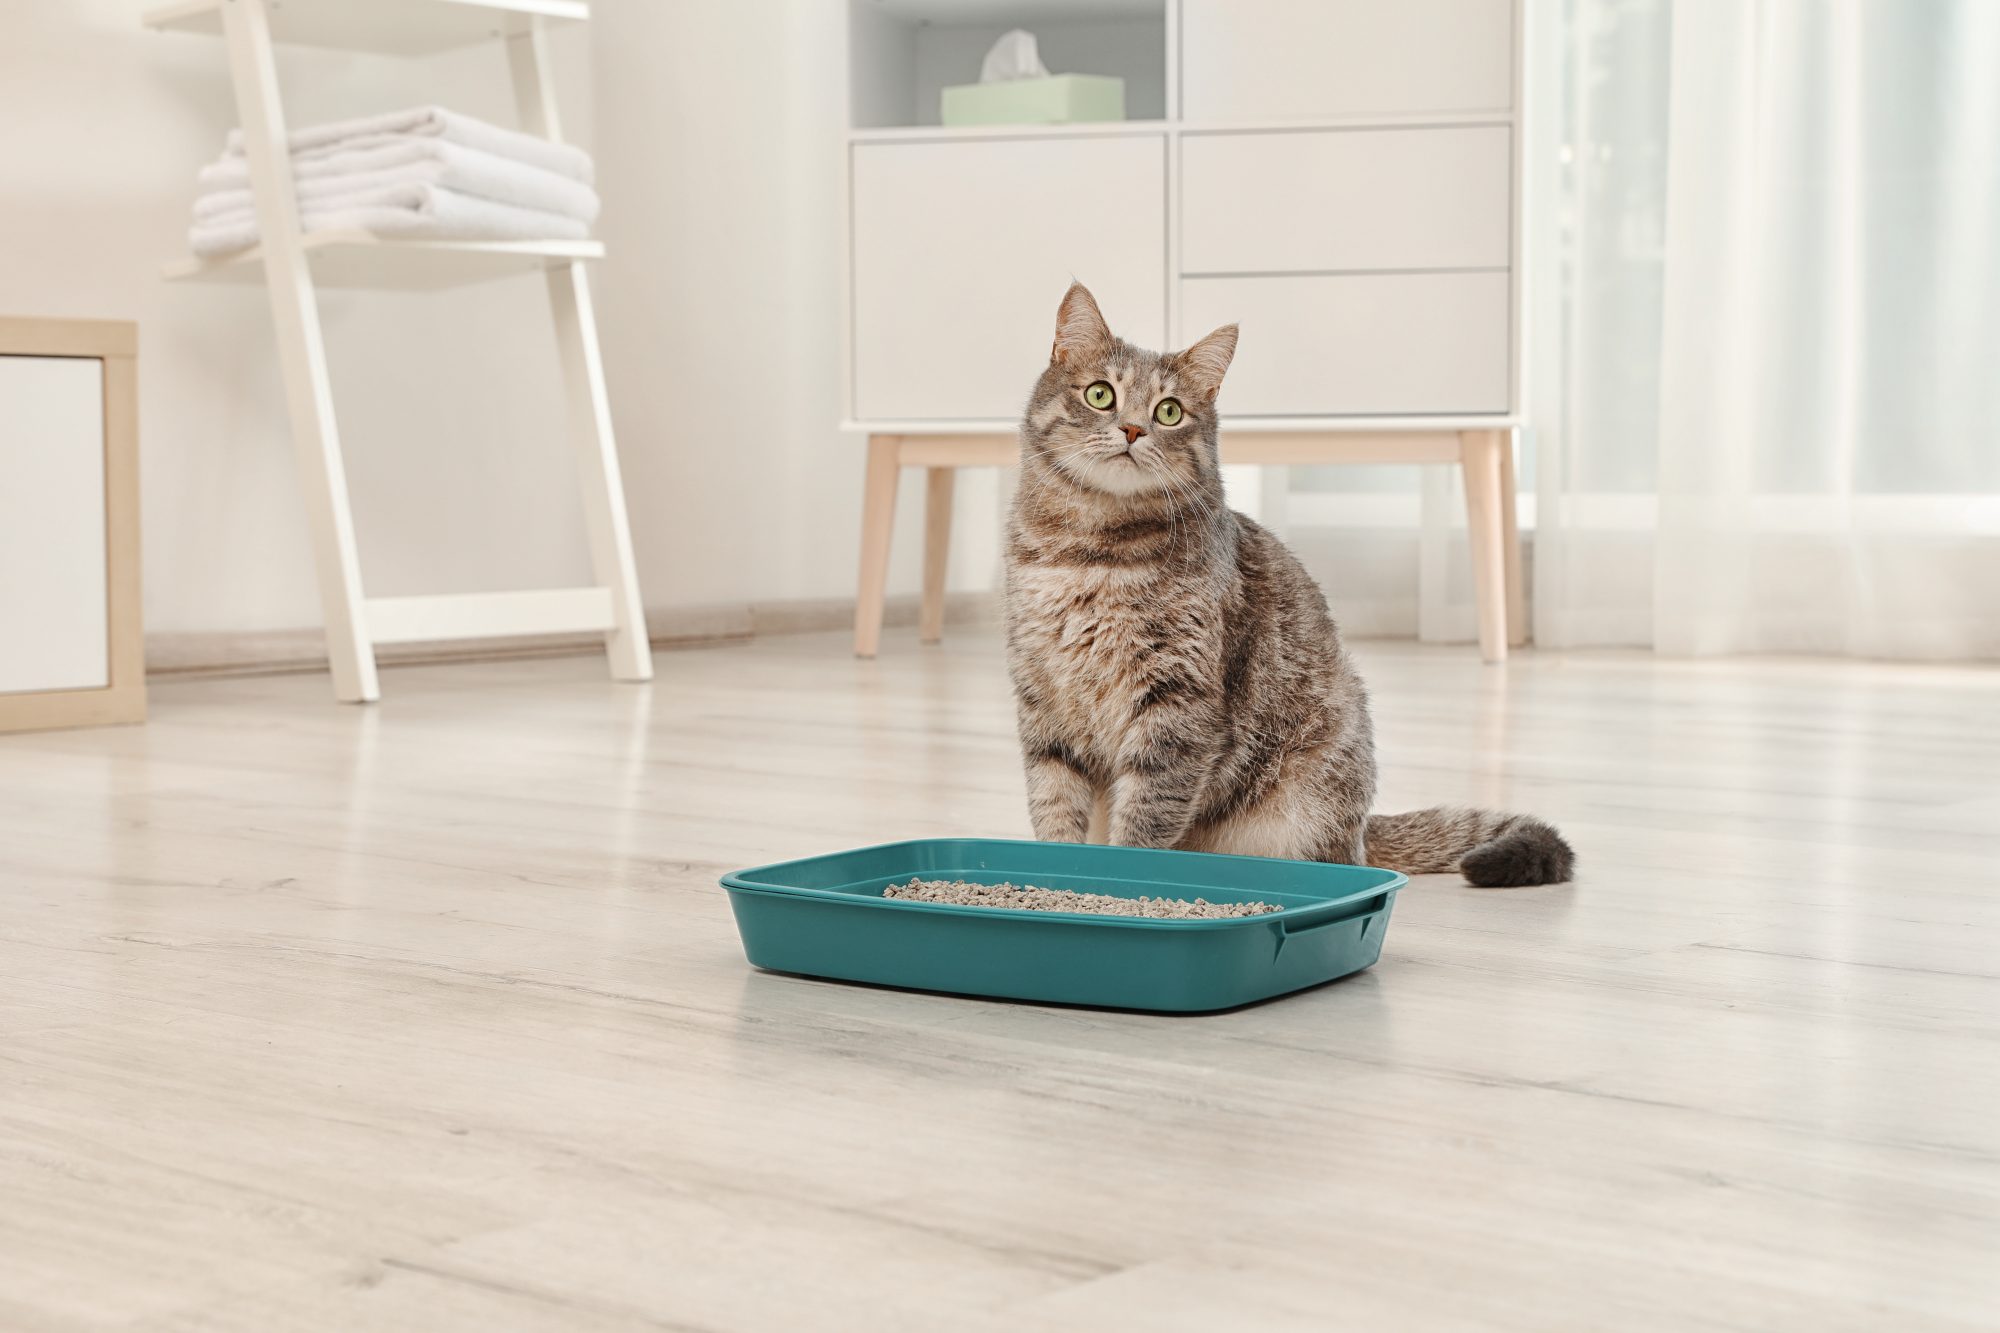 Double-Layer Cat Litter Trapping Mat - Sophyy